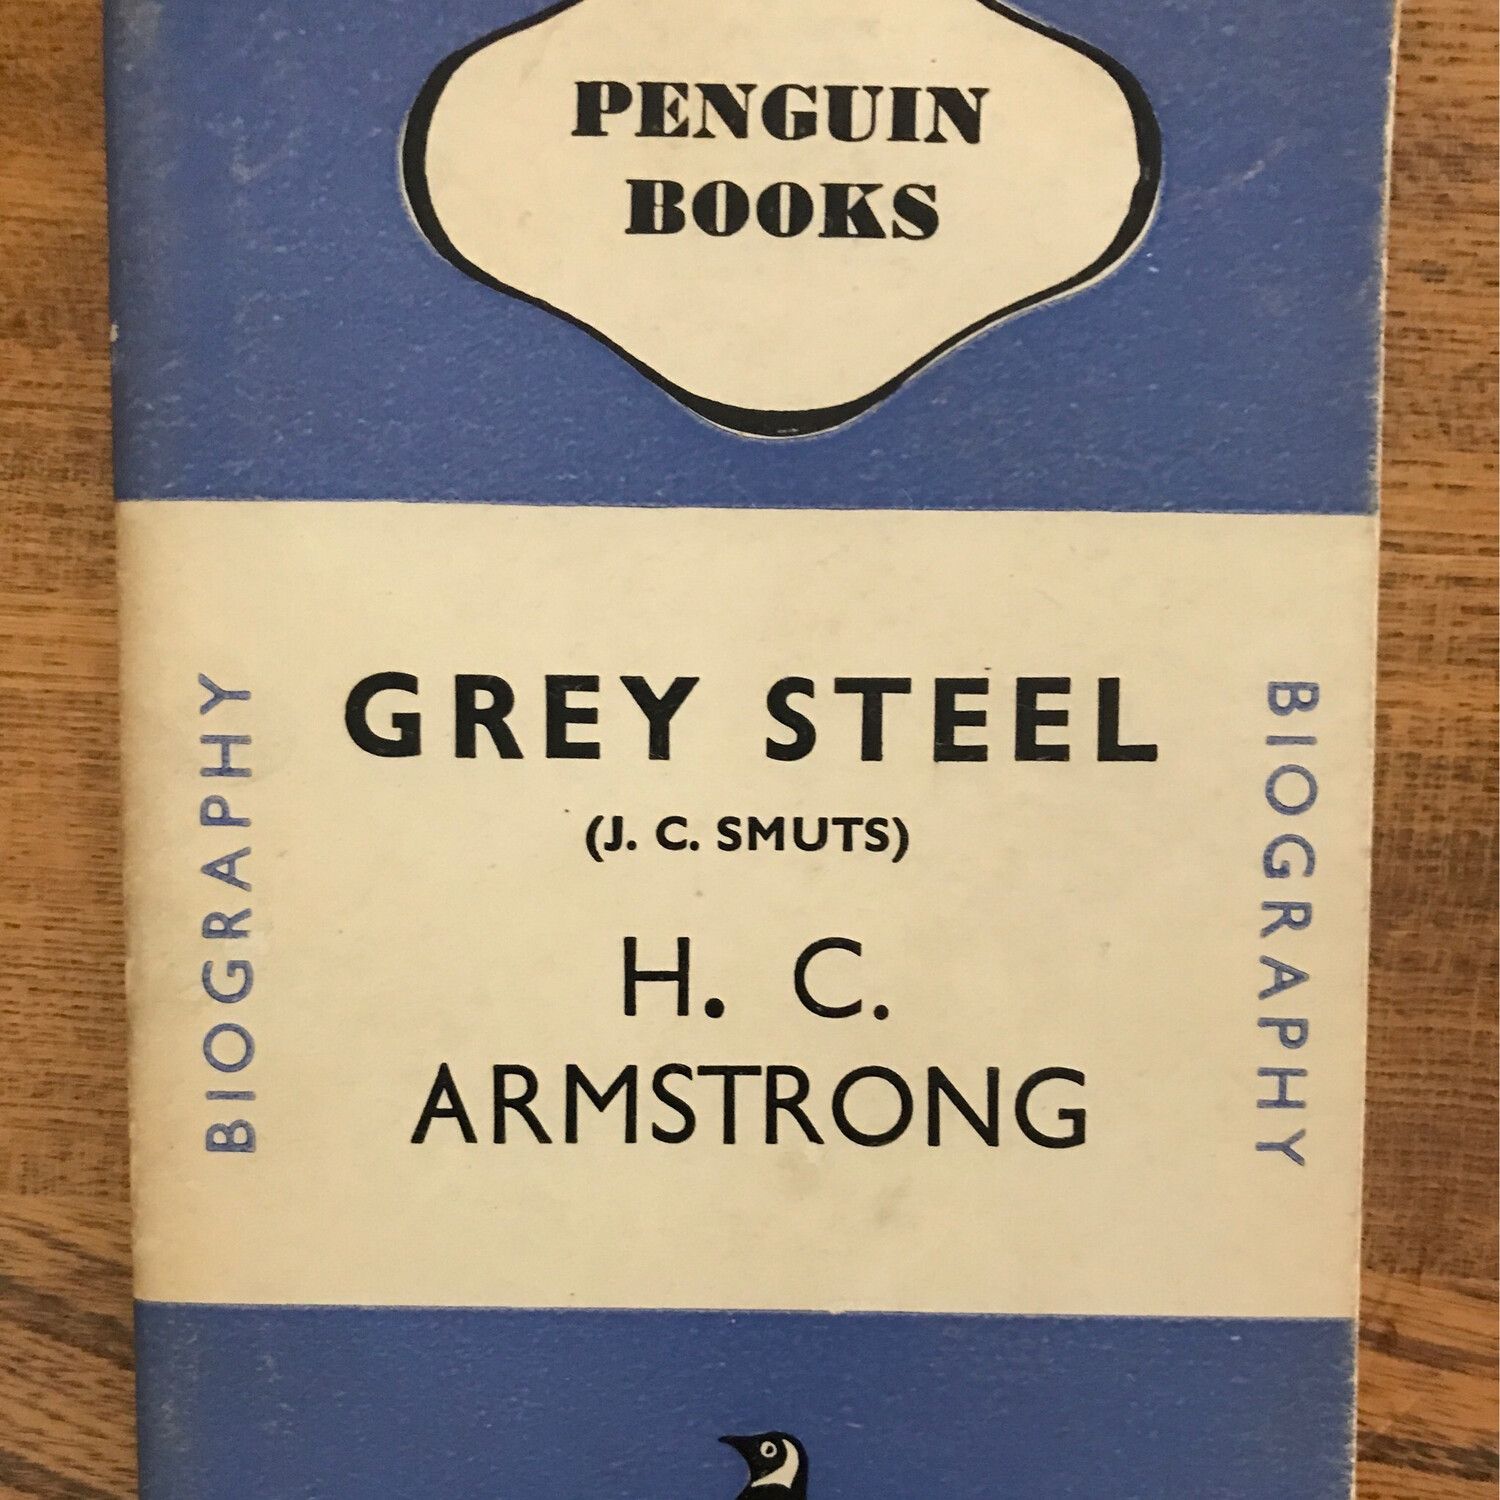 Grey Steel, H. C. Armstrong